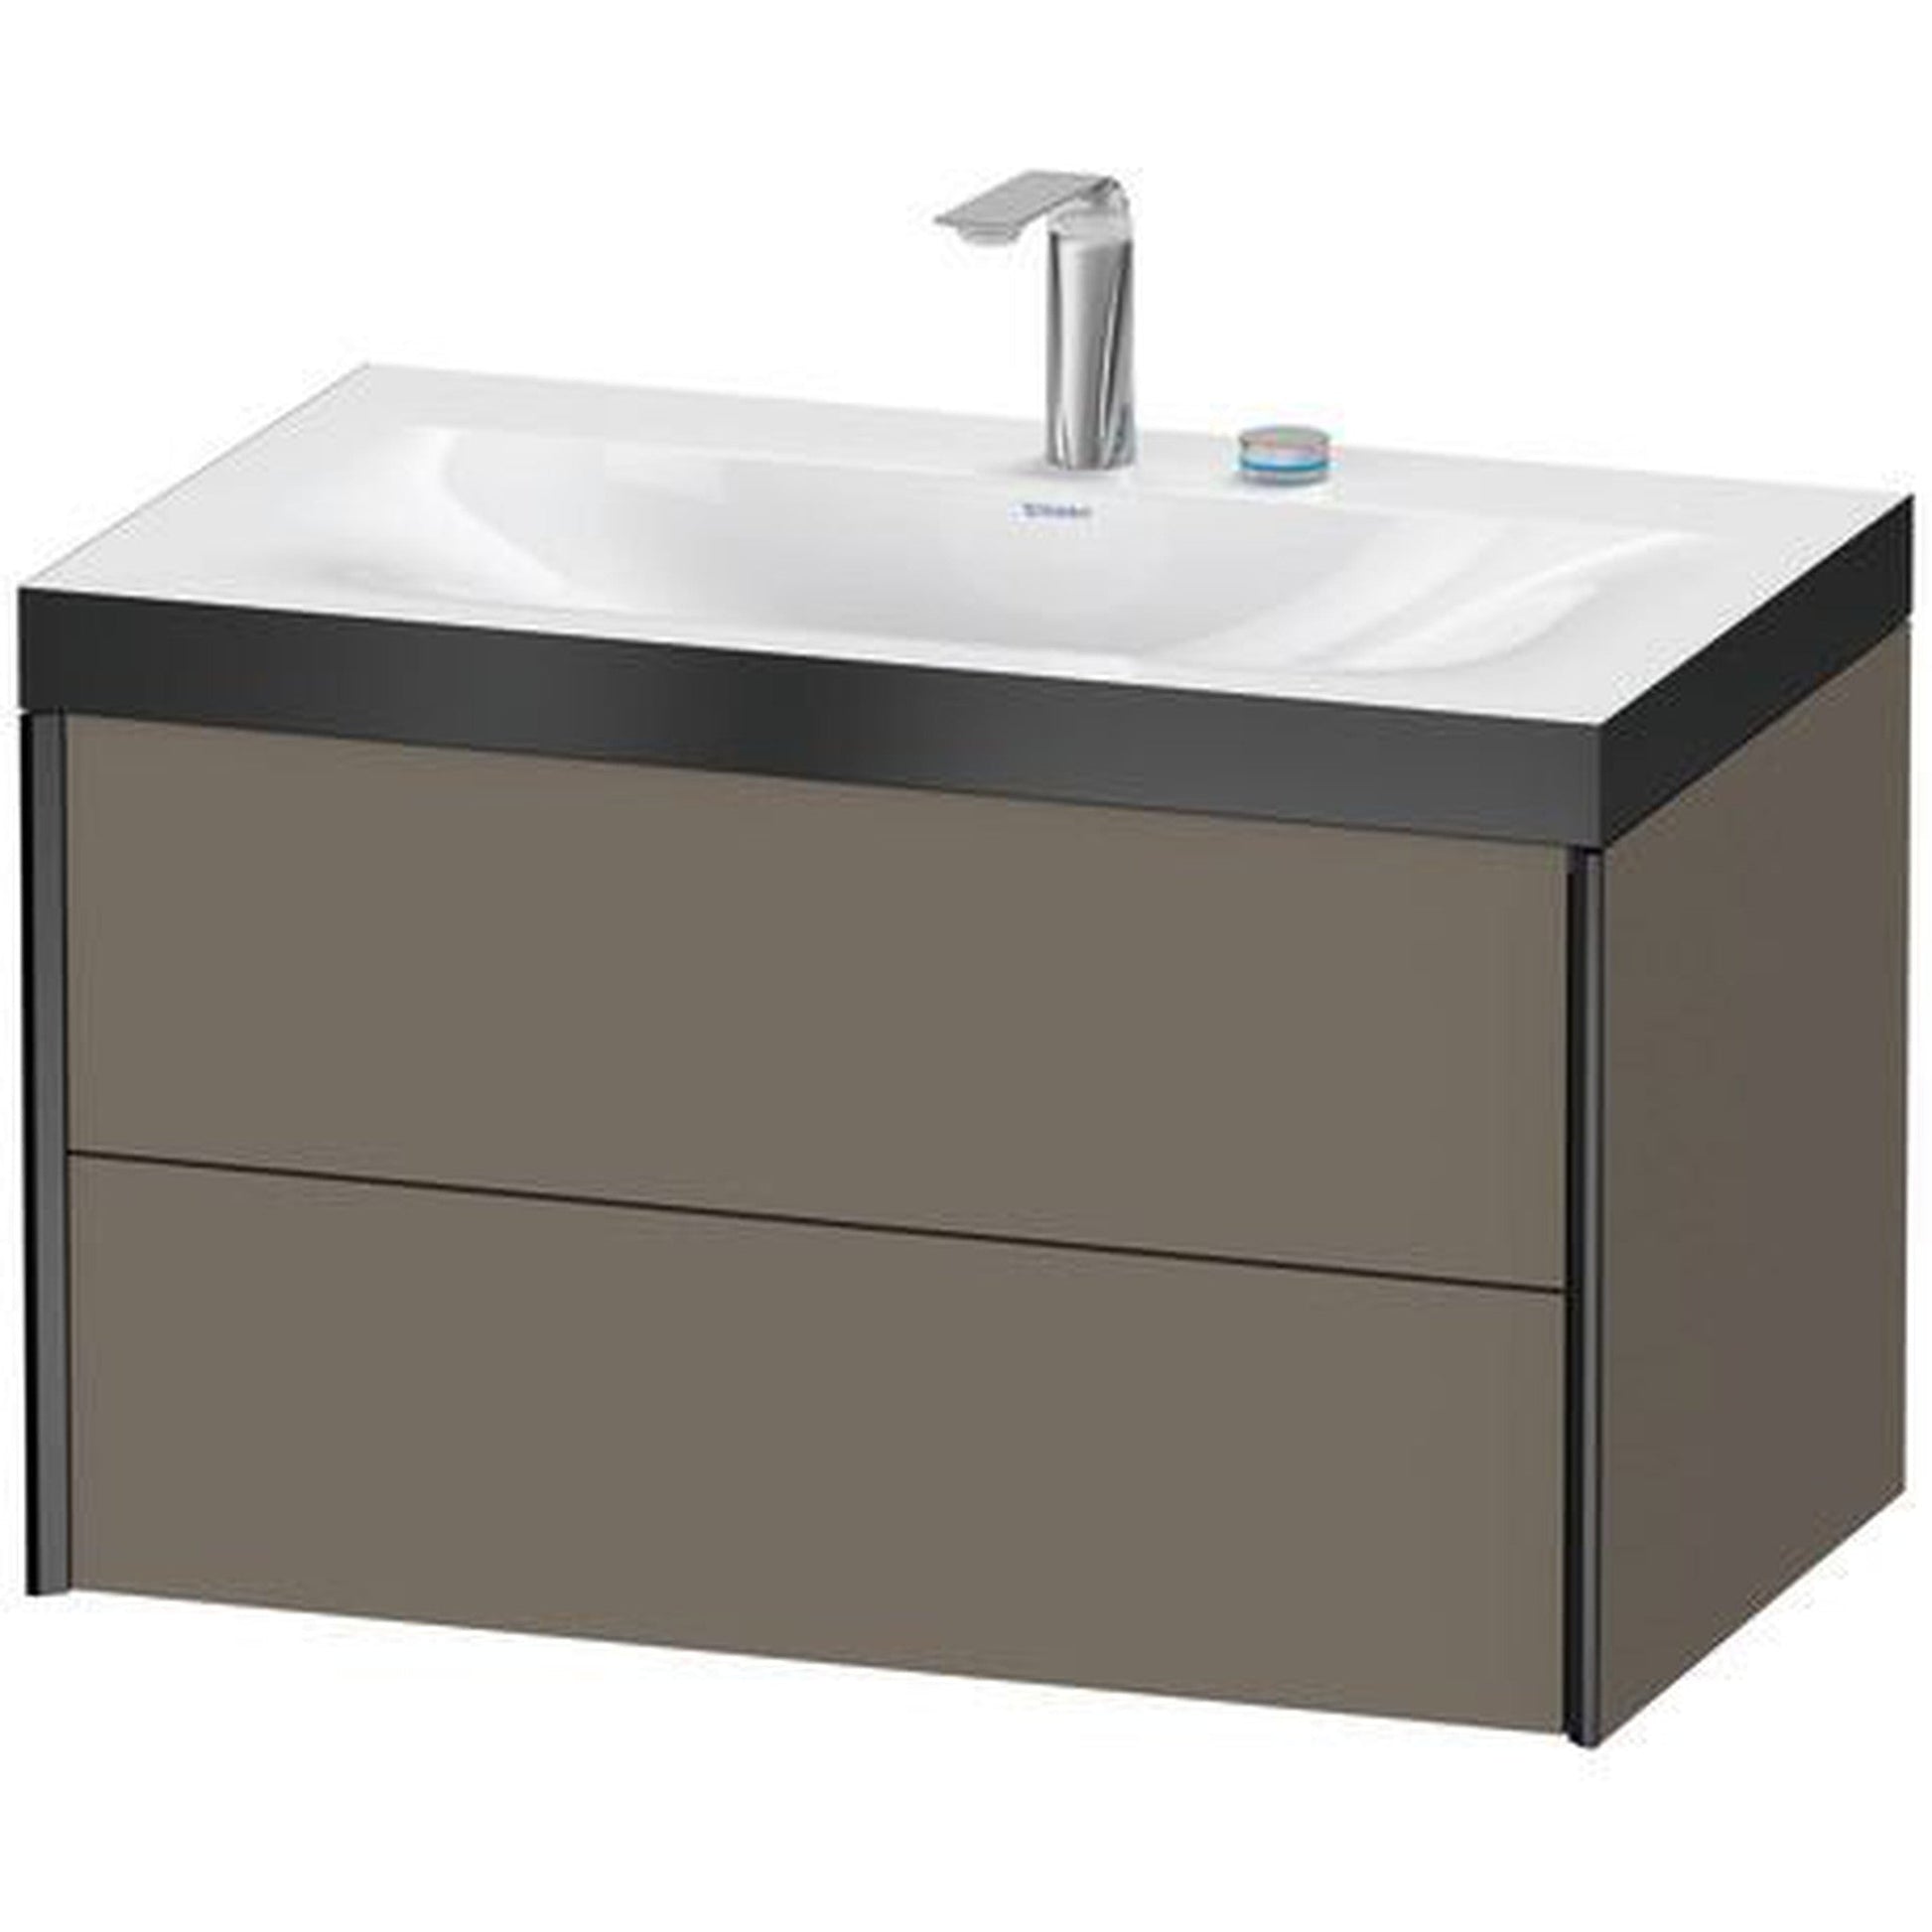 Duravit Xviu 31" x 20" x 19" Two Drawer C-Bonded Wall-Mount Vanity Kit With Two Tap Holes, Flannel Gray (XV4615EB290P)